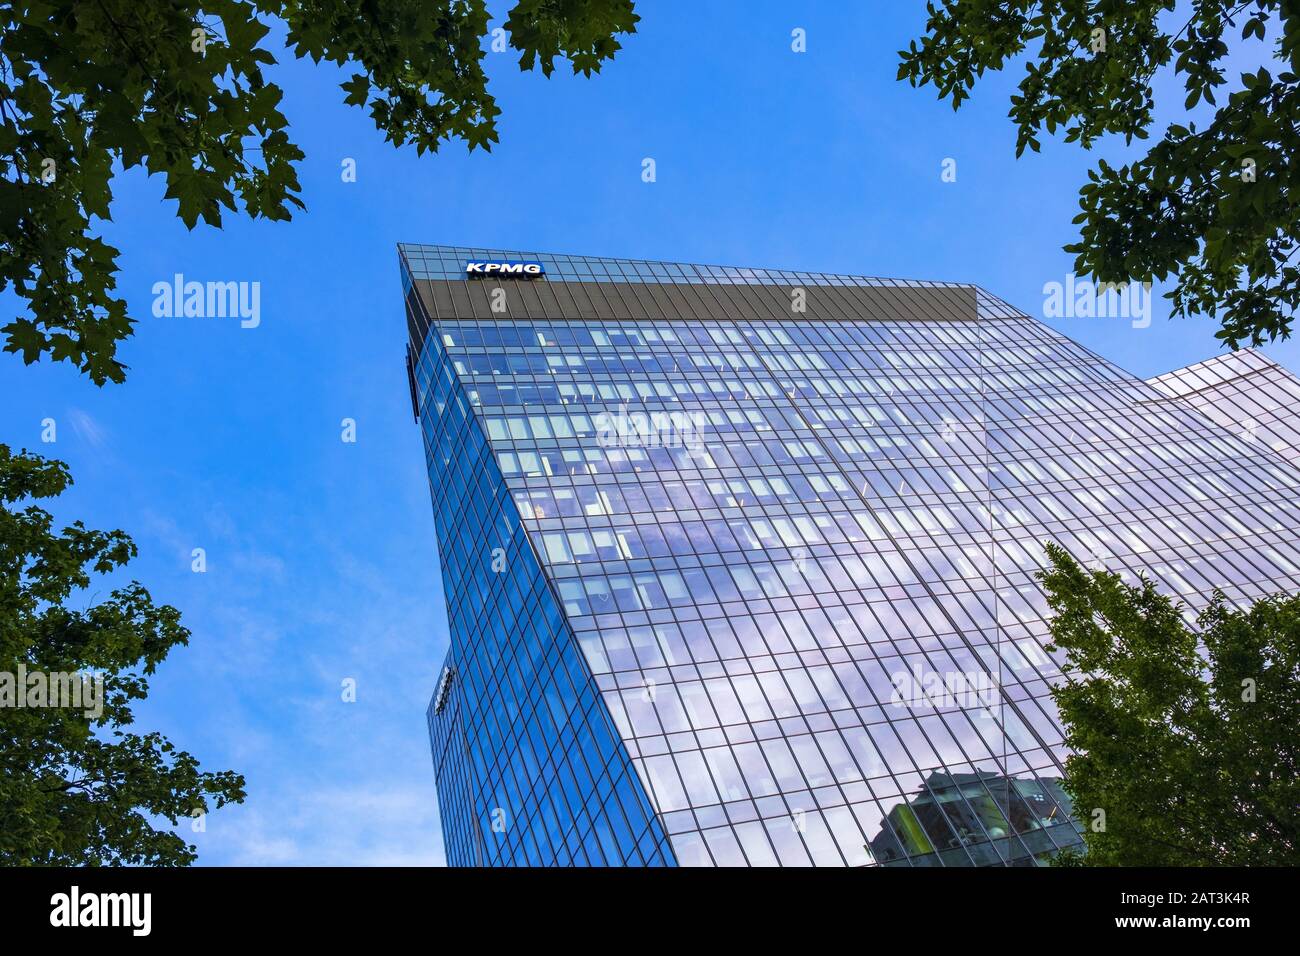 Warsaw, Mazovia / Poland - 2019/05/30: Modernistic office architecture of the Gdanski Business Center development project - in South Zoliboz district of Warsaw Stock Photo